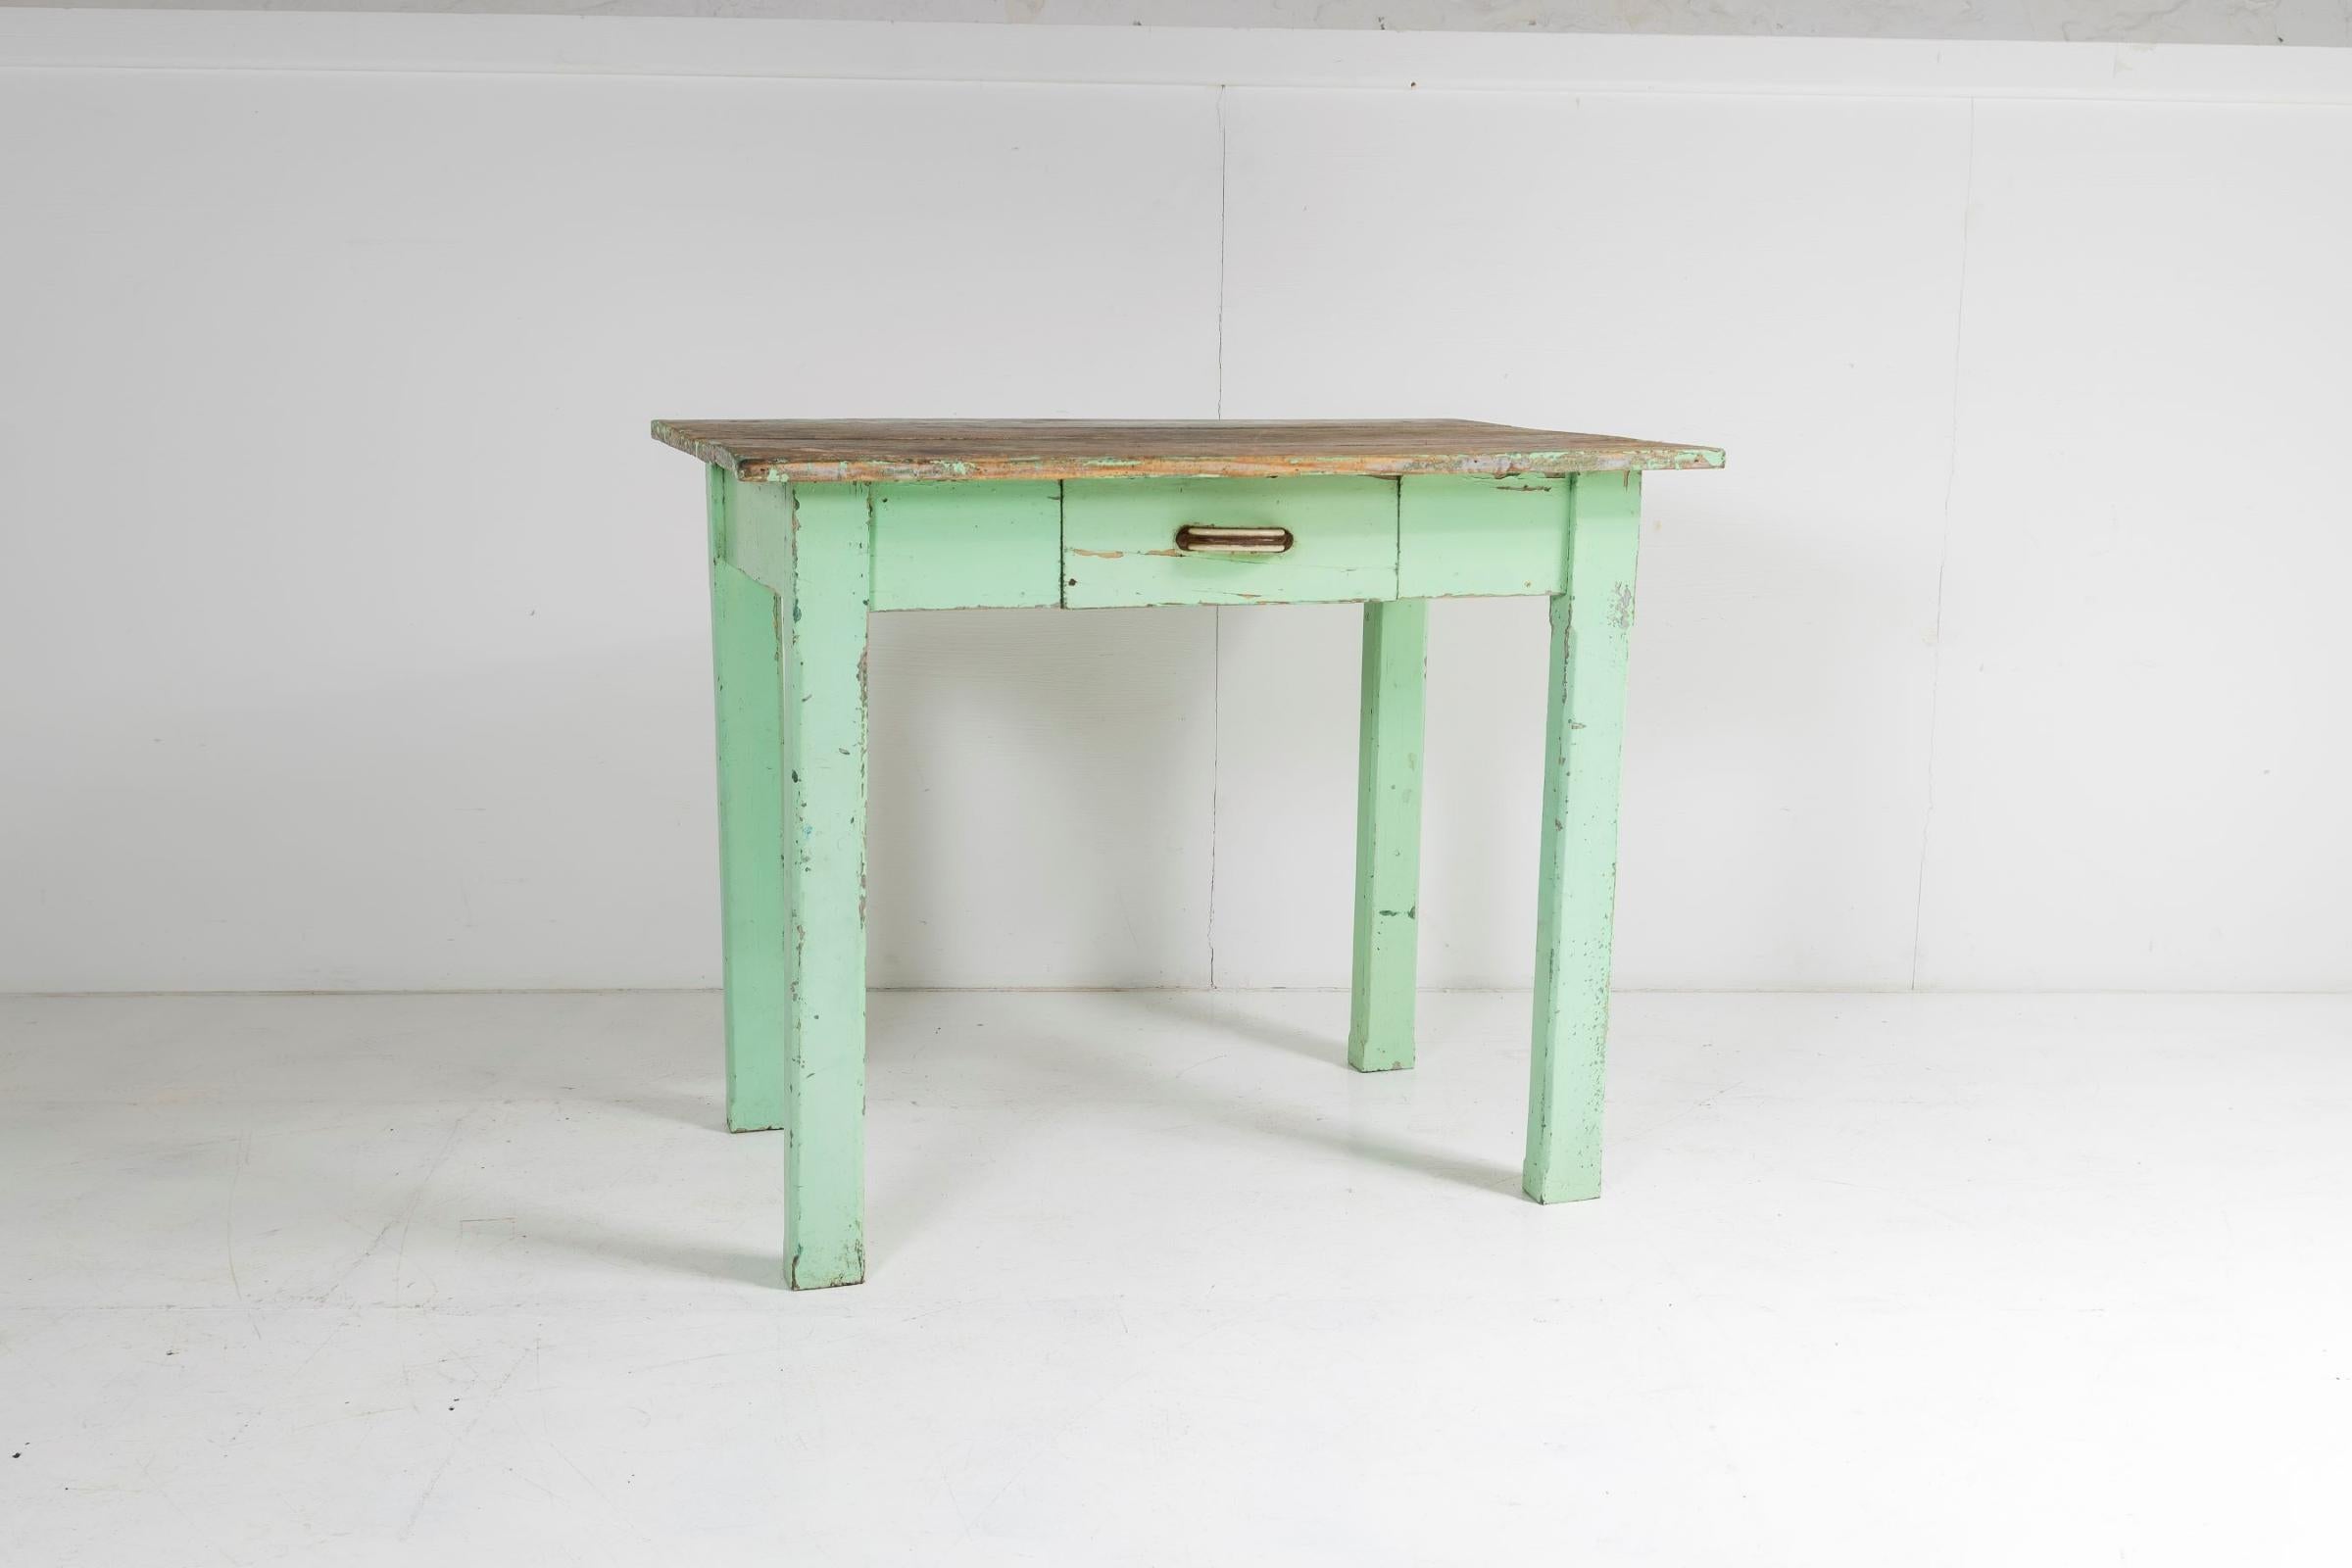 Welsh Small Original Rustic Green Painted Pine Farmhouse Table or Writing Table Desk